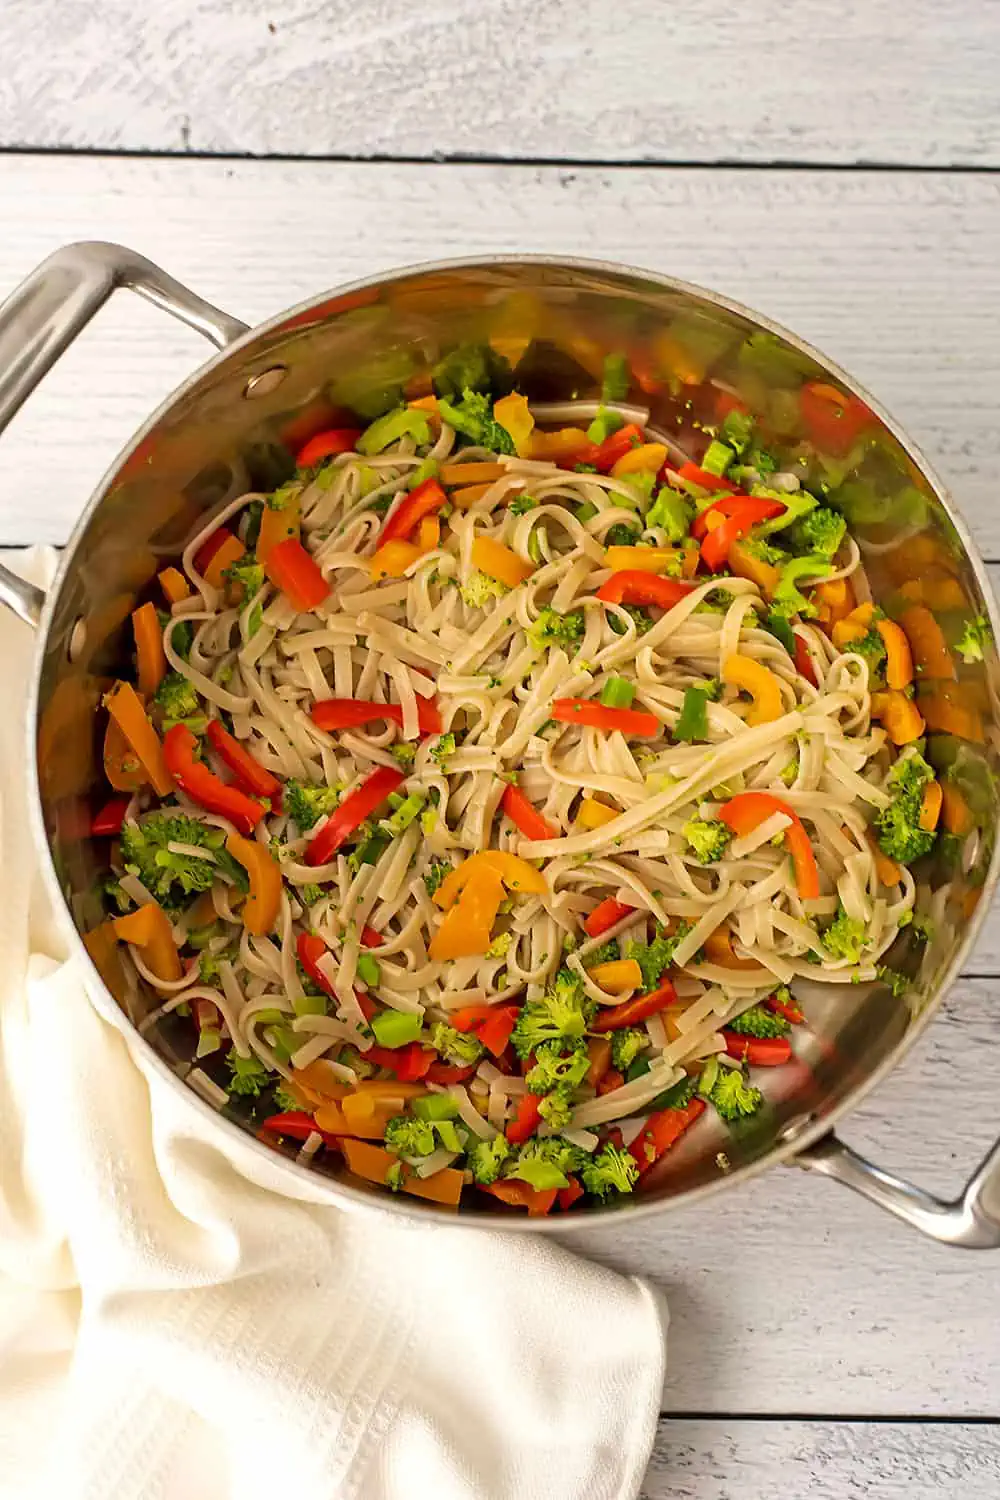 Rice noodles and veggies after draining the pot.